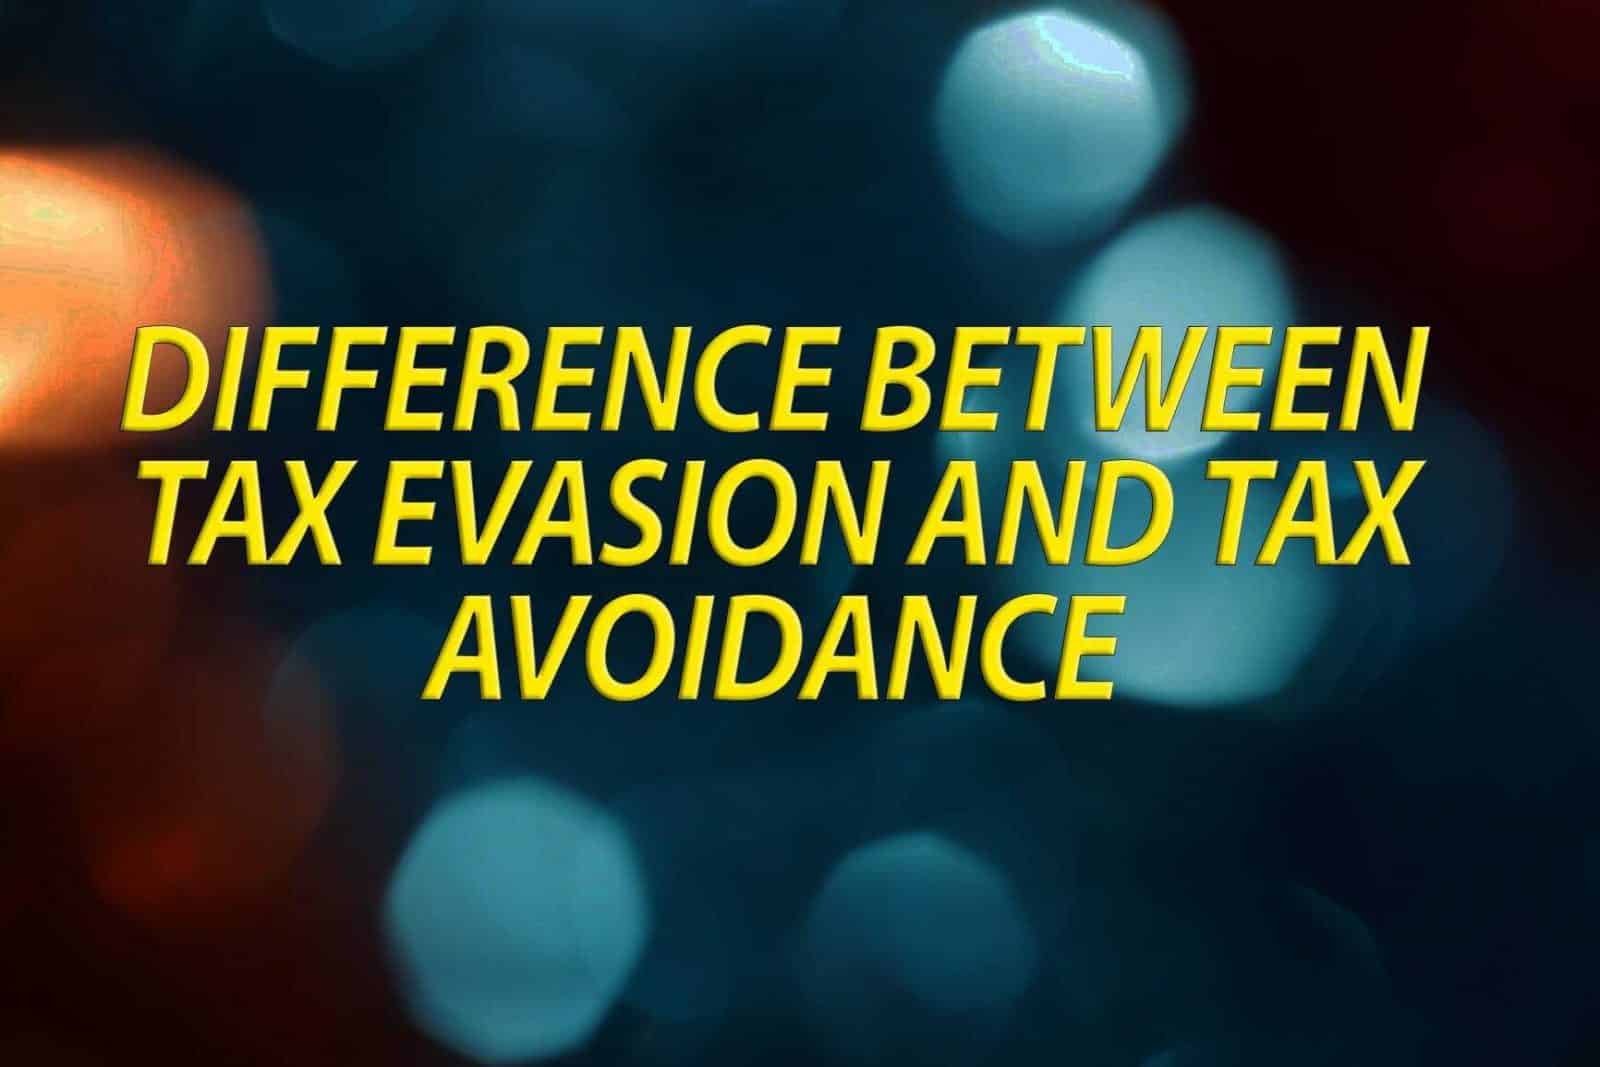 Tax evasion and tax avoidance, what is the difference